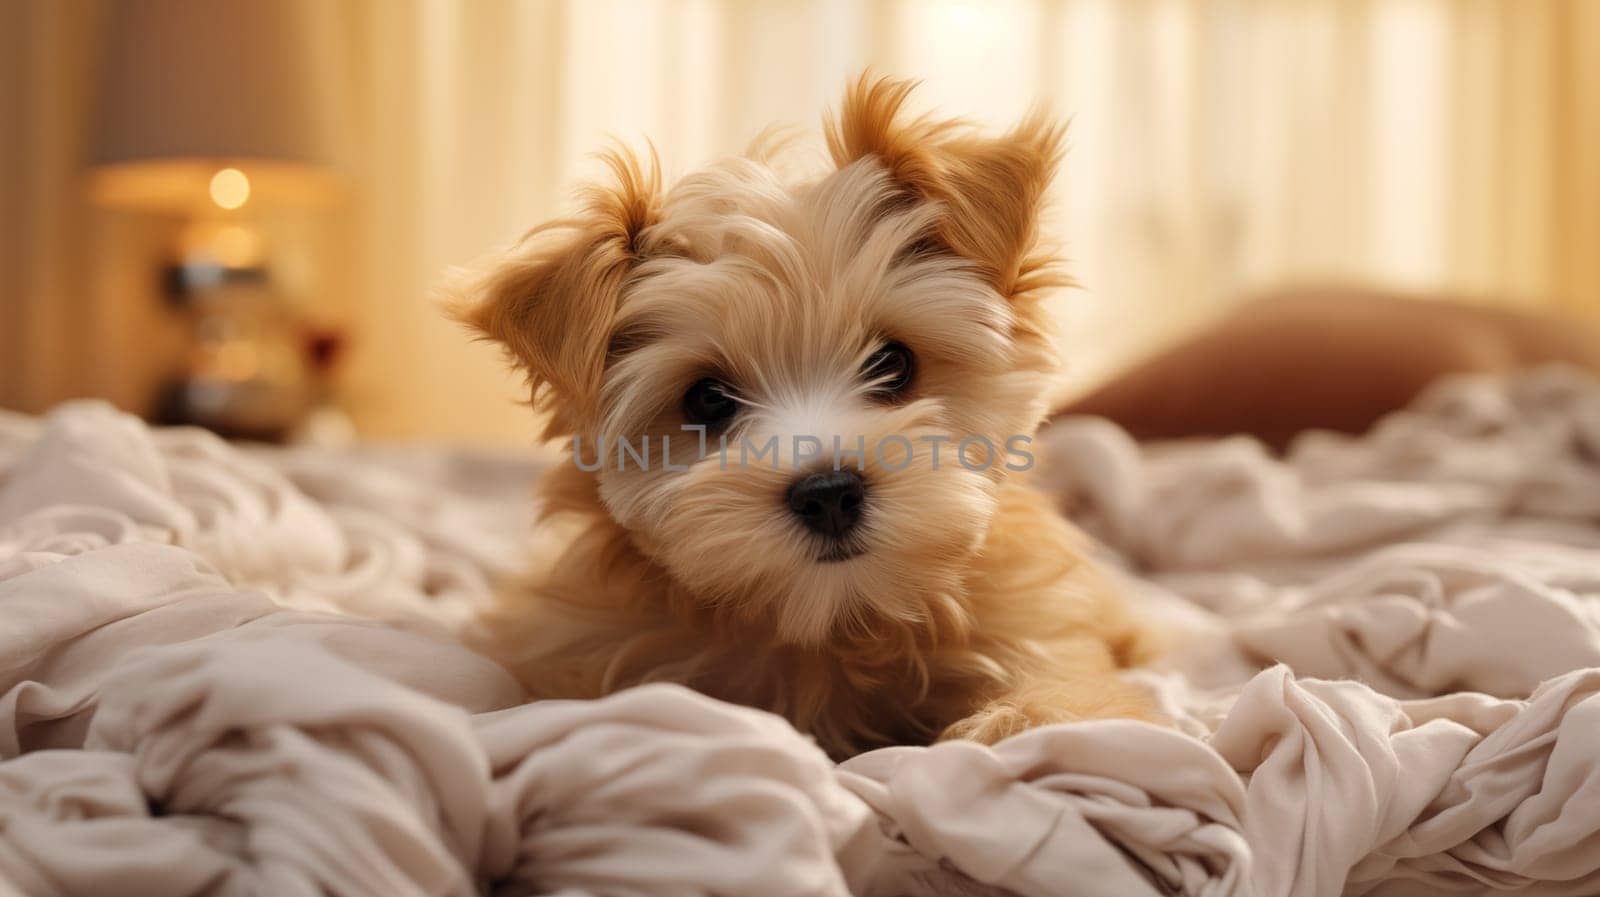 Cute ginger terrier puppy lying on a cozy blanket, at bedroom, warm light.